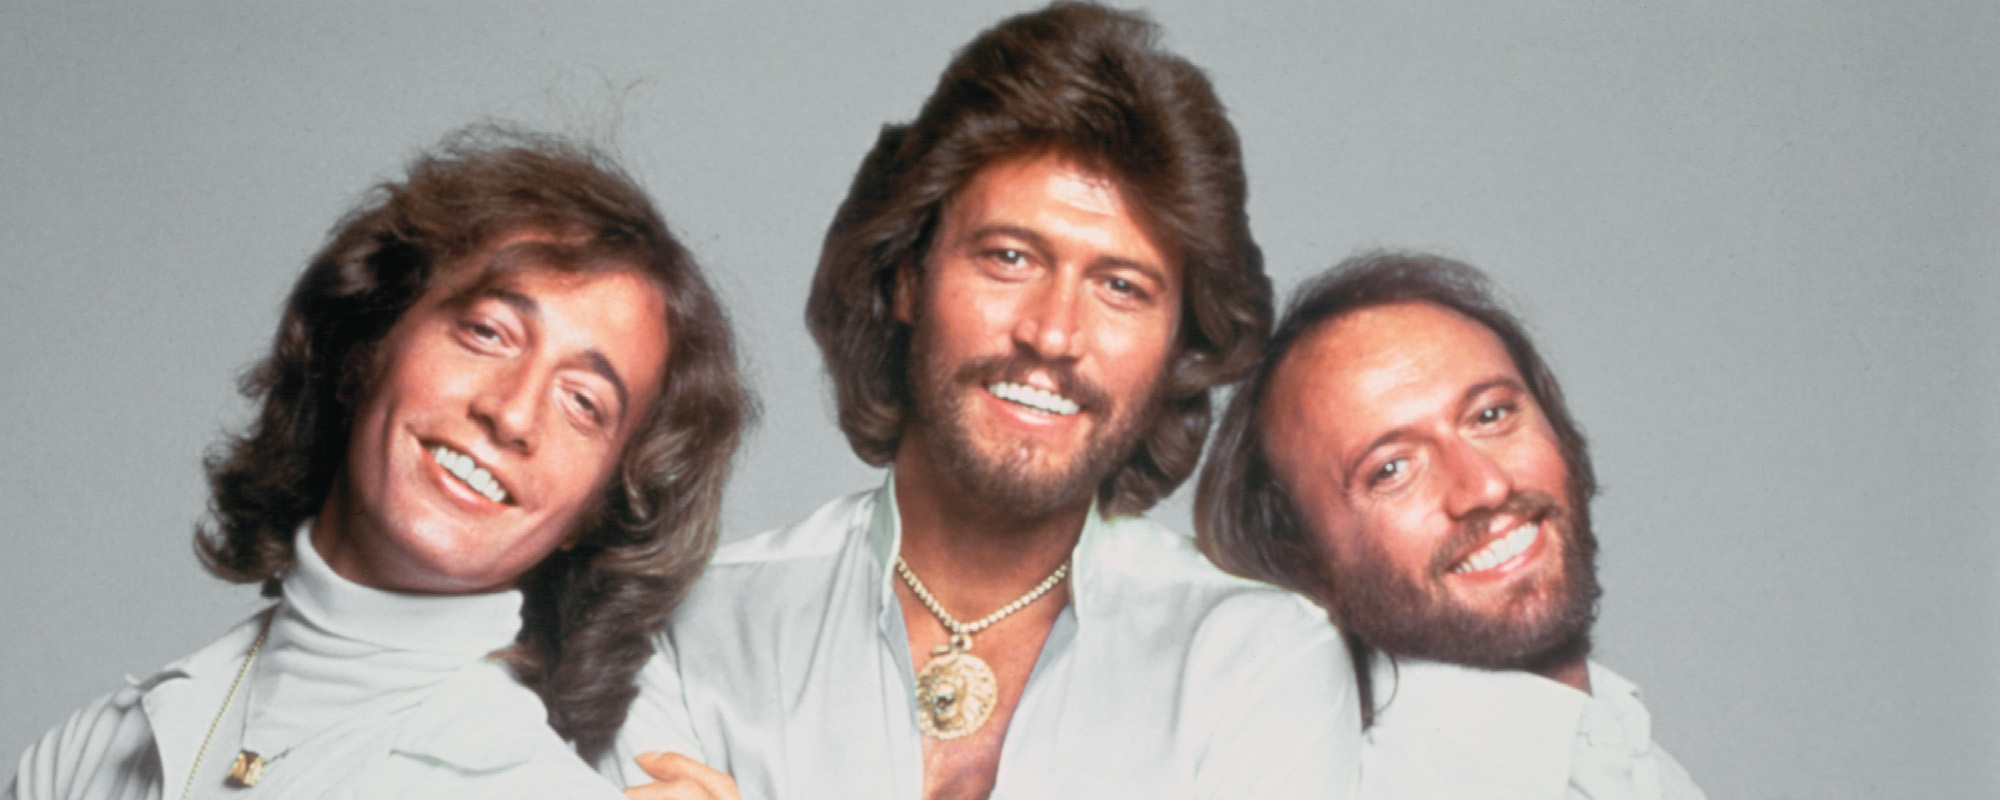 The Meaning Behind “Tragedy” by the Bee Gees and the Disco Demolition that Followed